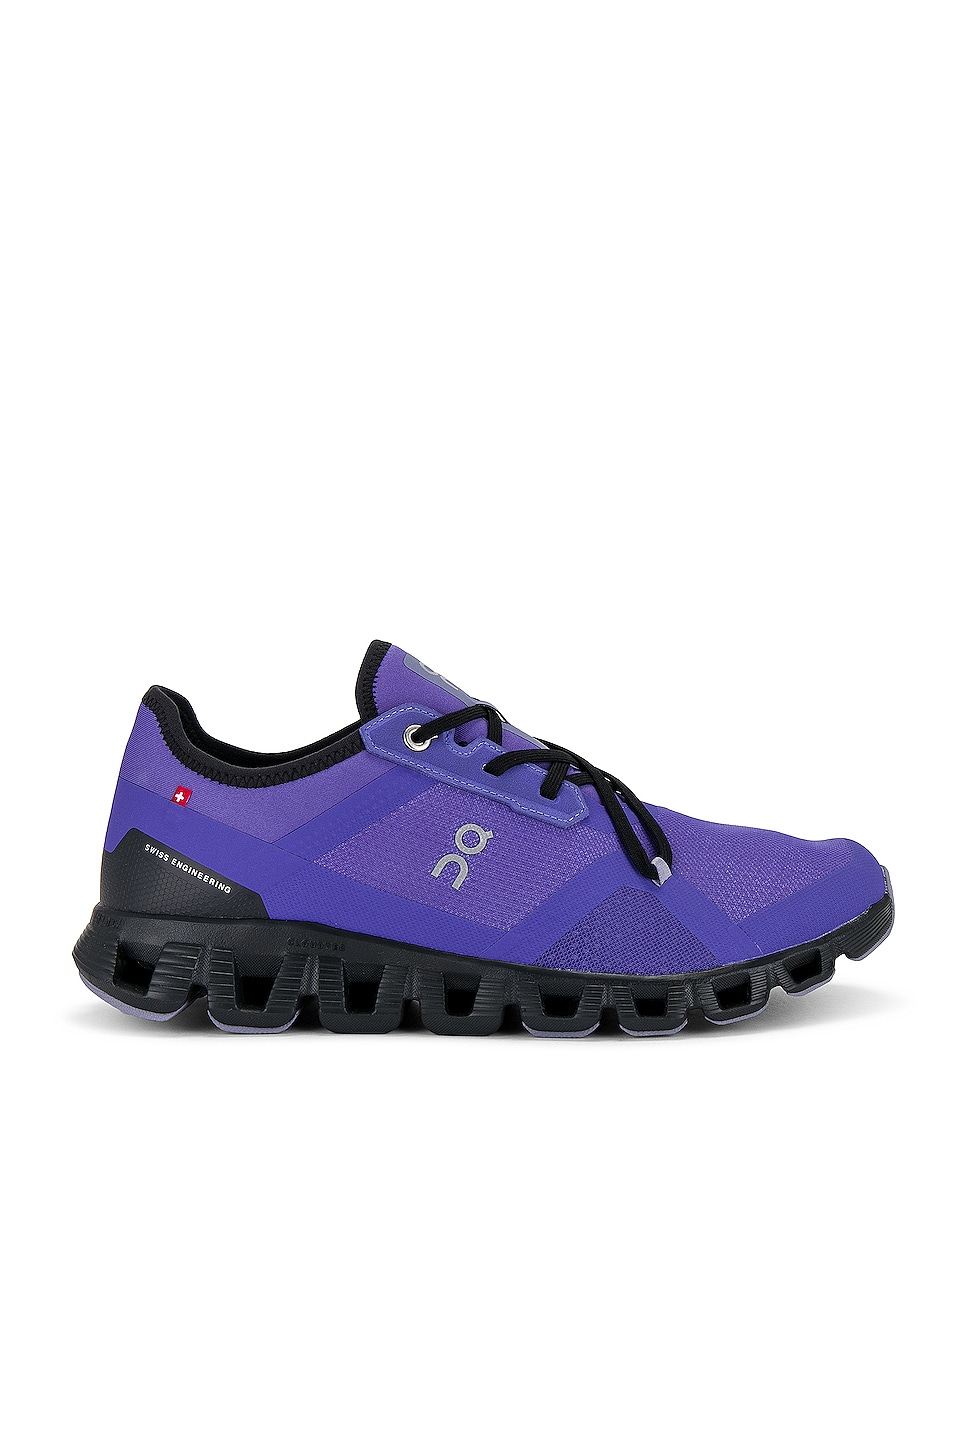 Image 1 of On Cloud X 3 Ad Sneaker in Blueberry & Black